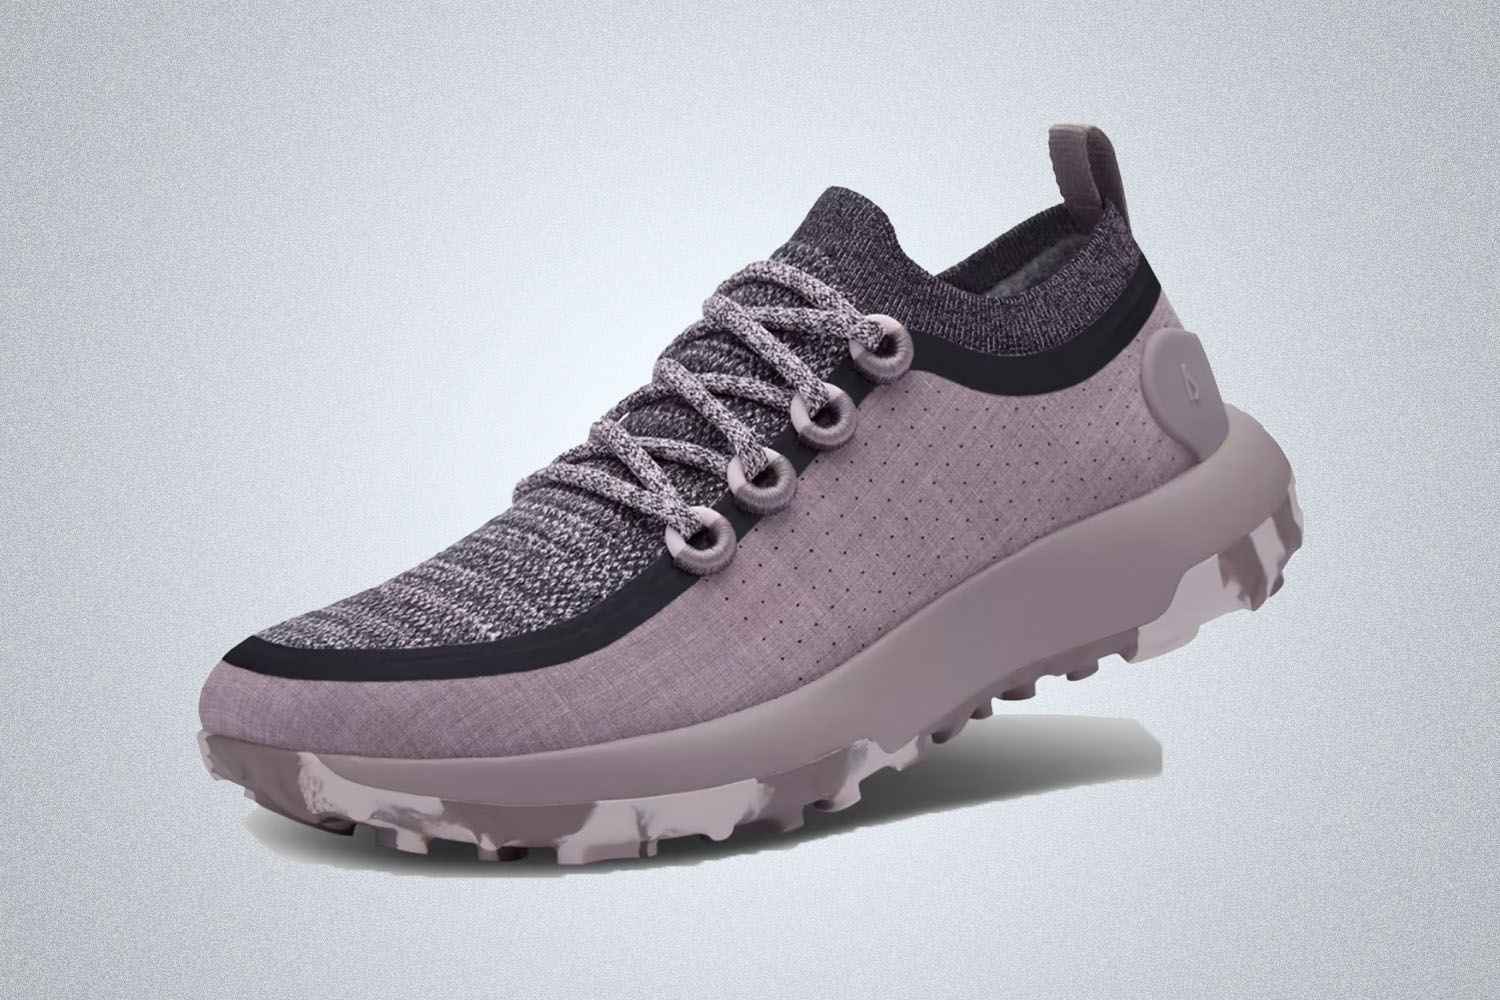 The purple and grey Trail Runner sneaker from Allbirds on a grey background